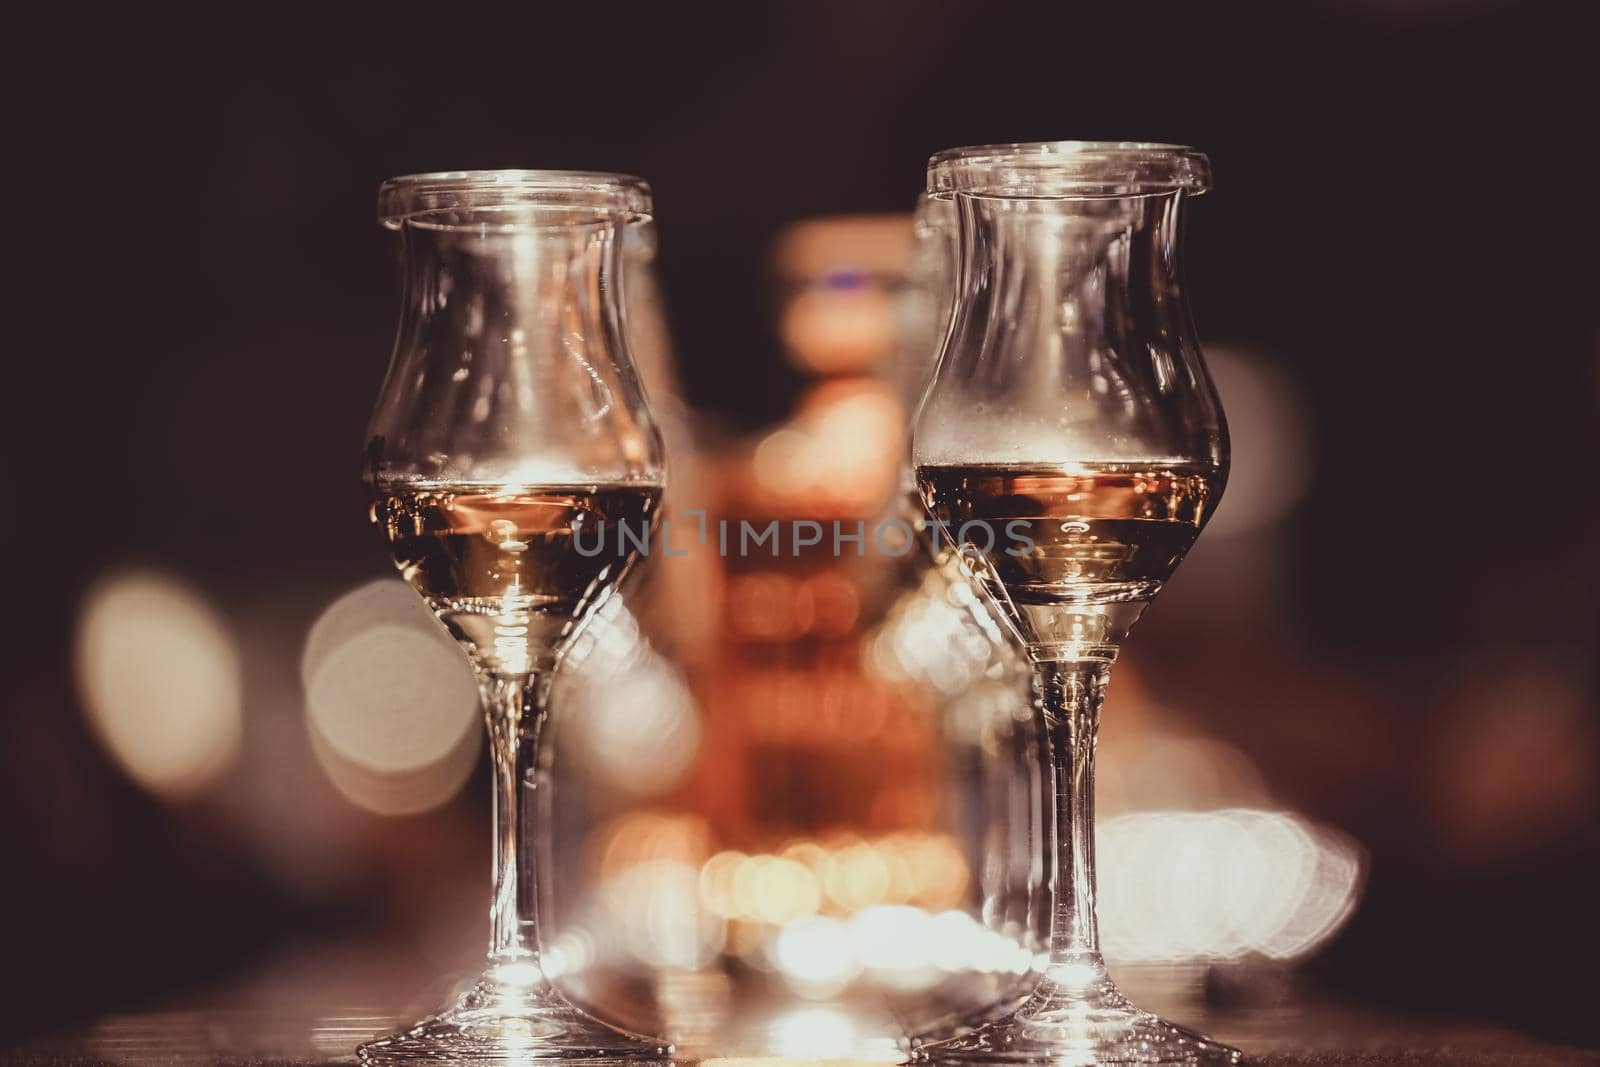 Image of wine glasses along with bar counters. Shooting Location: Tokyo metropolitan area